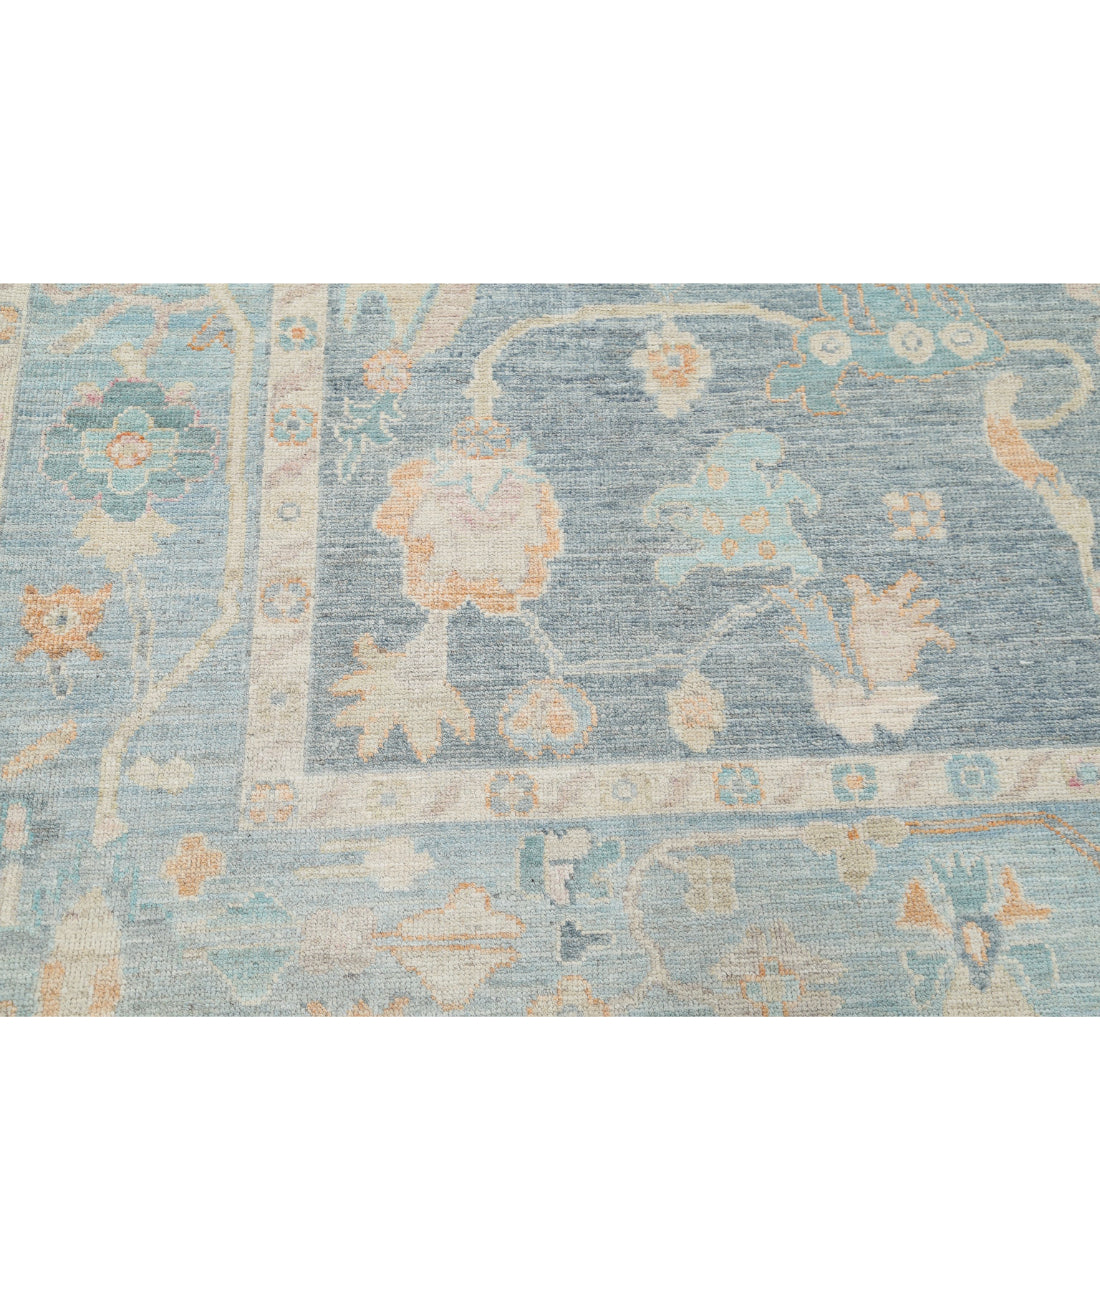 Hand Knotted Oushak Wool Rug - 8'4'' x 9'11'' 8'4'' x 9'11'' (250 X 298) / Blue / Green